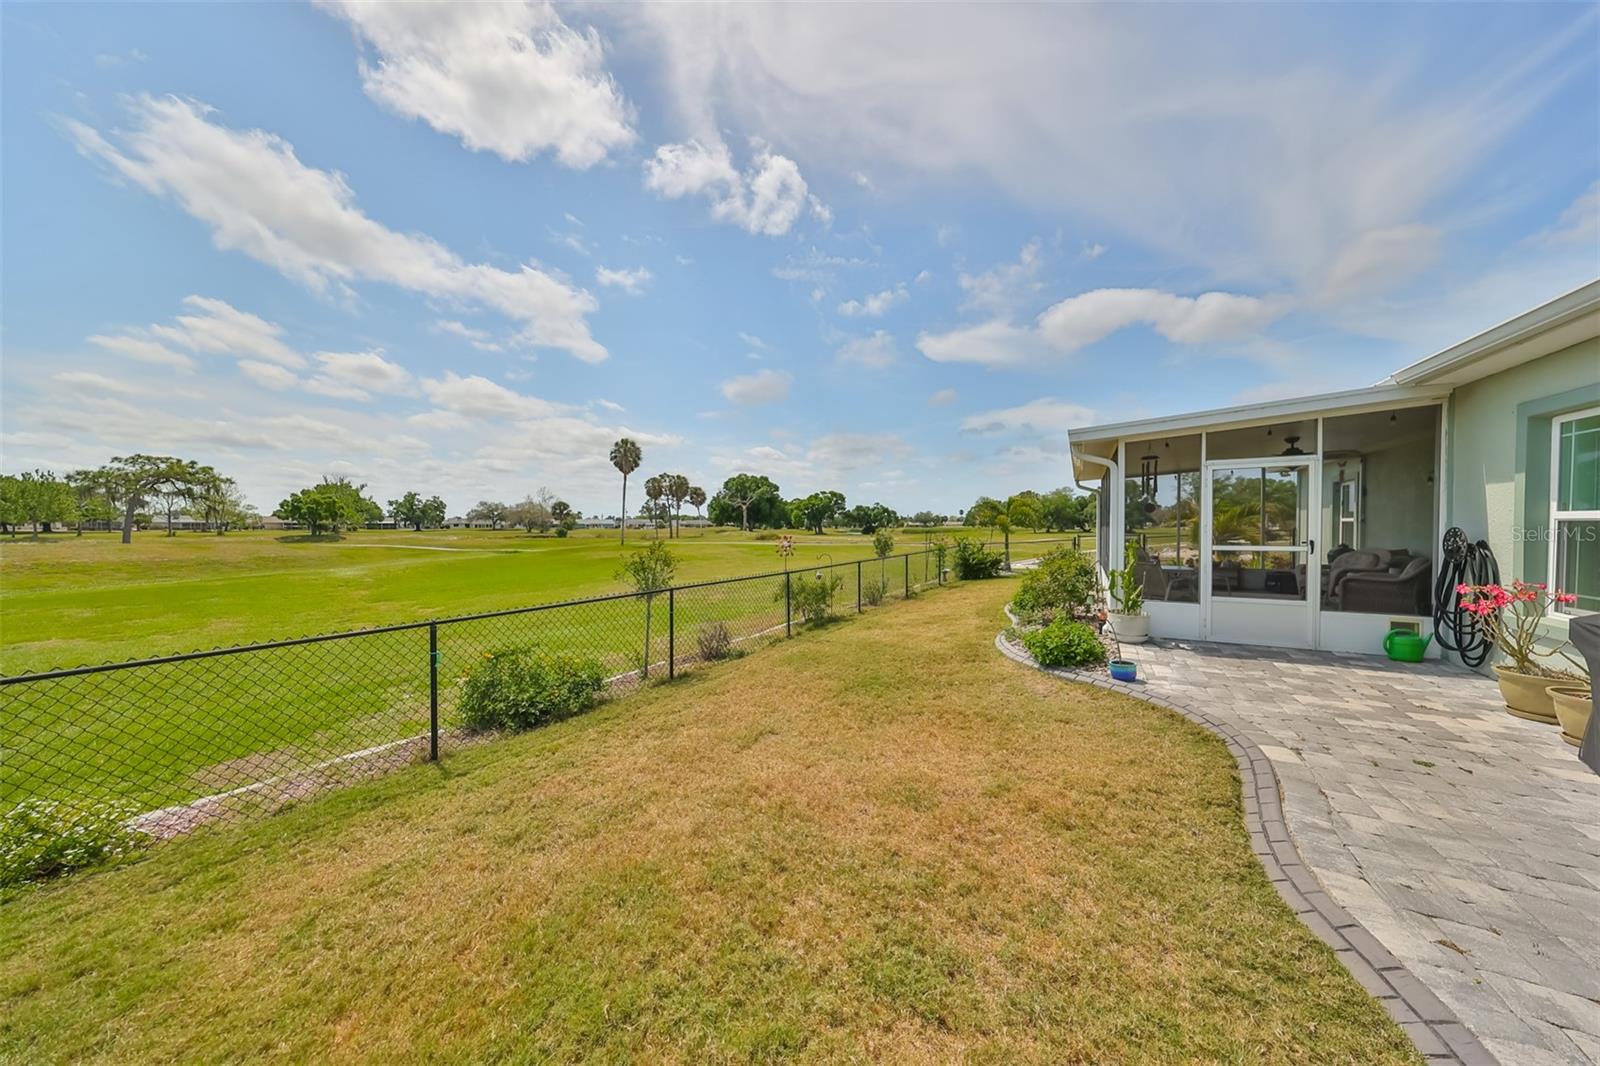 Completely fenced in yard is perfect for pets. Notice the custom paved walkway and screened covered patio to relax and enjoy the view while golfers pass by.